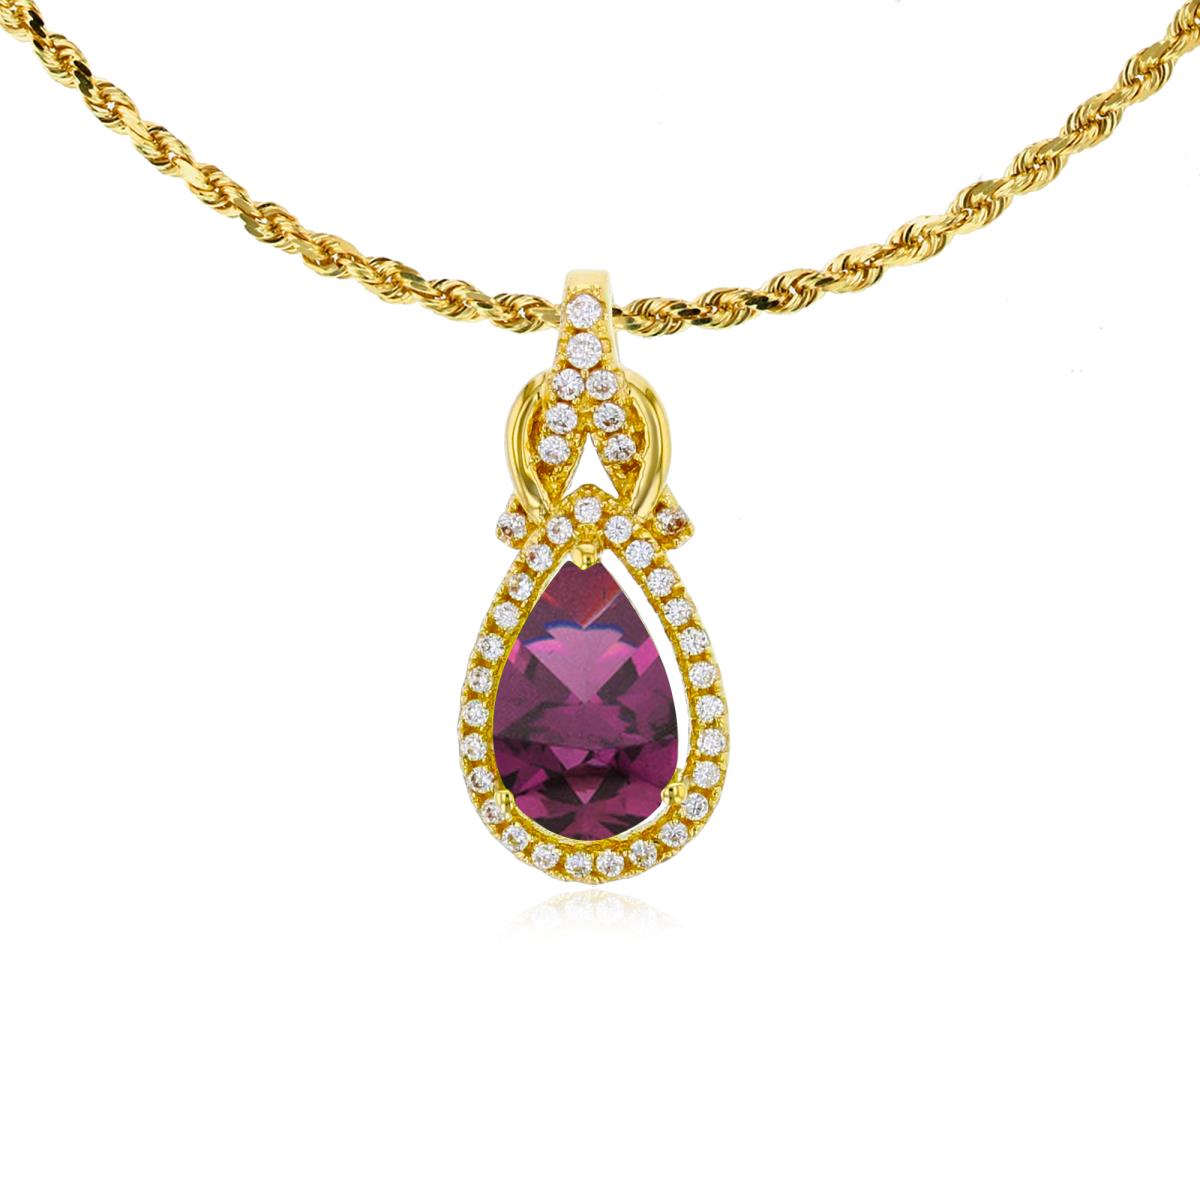 14K Yellow Gold 8x5mm Pear Cut Rhodolite & 0.11 CTTW Rnd Diamond Knot 18" Rope Chain Necklace